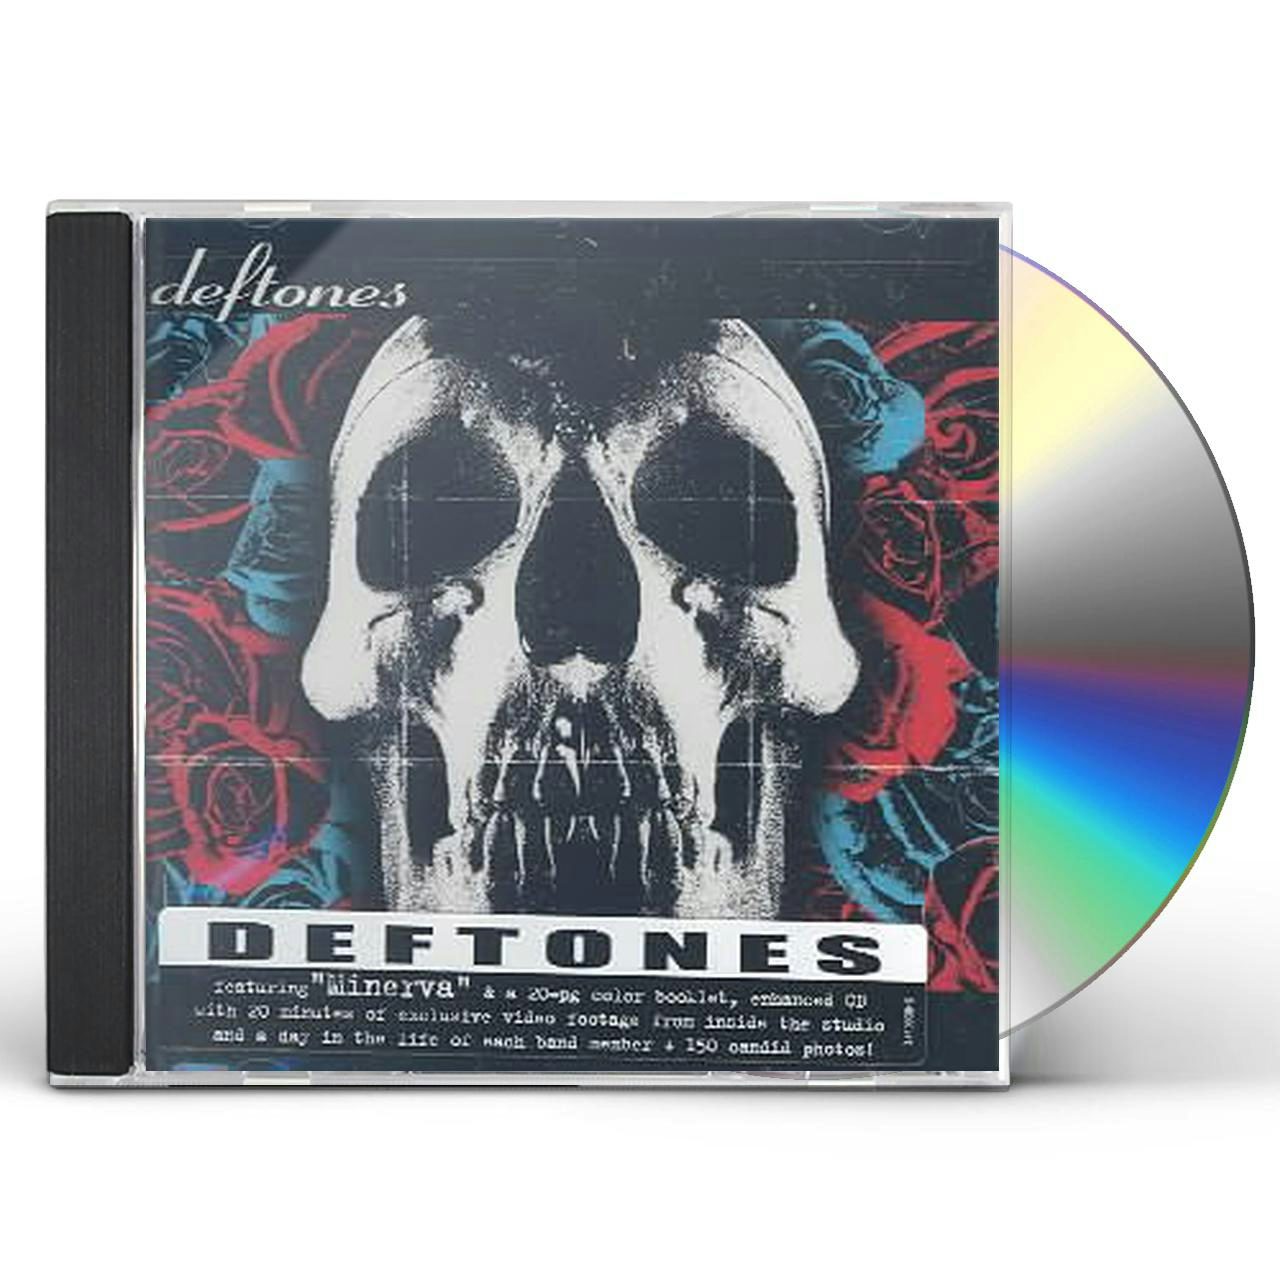 what deftones albums were out in 1993